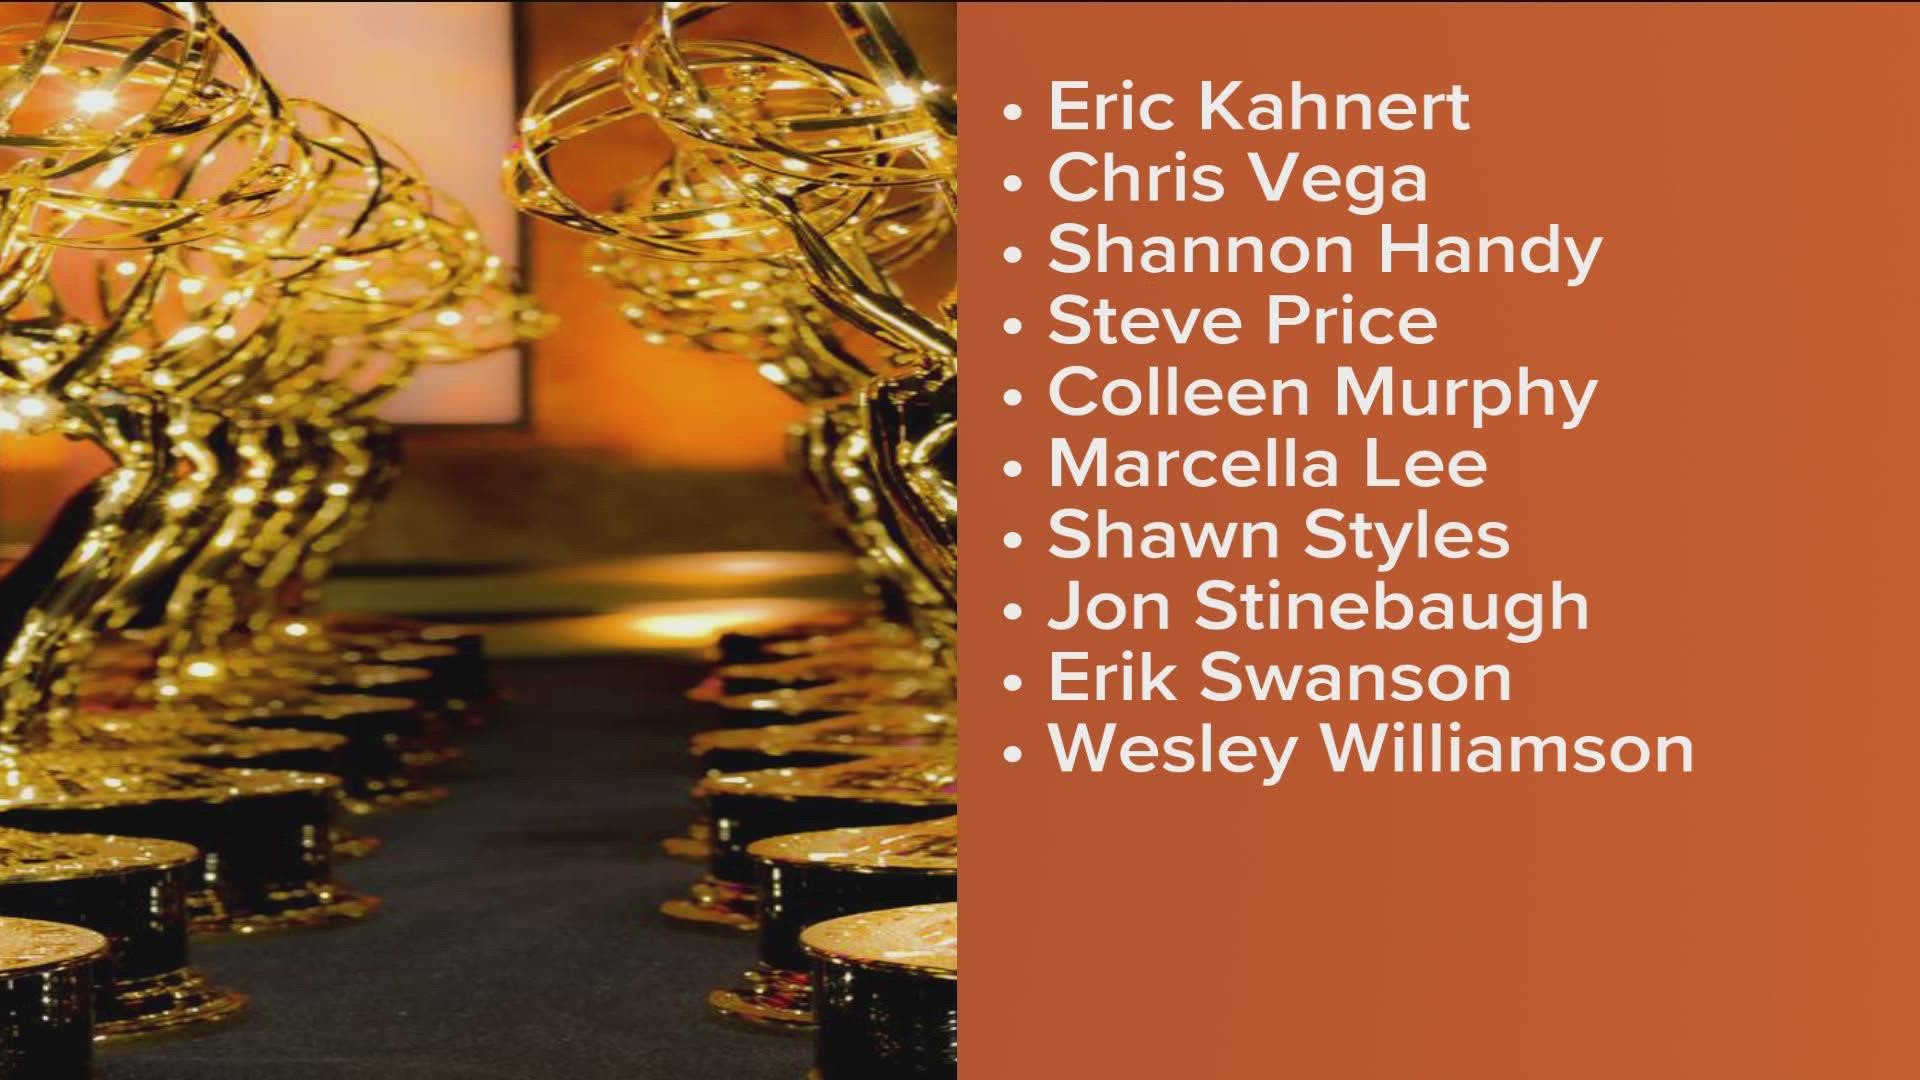 Journalists from CBS 8 took home more than 11 Emmy Awards at the ceremony held on June 18 in Rancho Mirage.